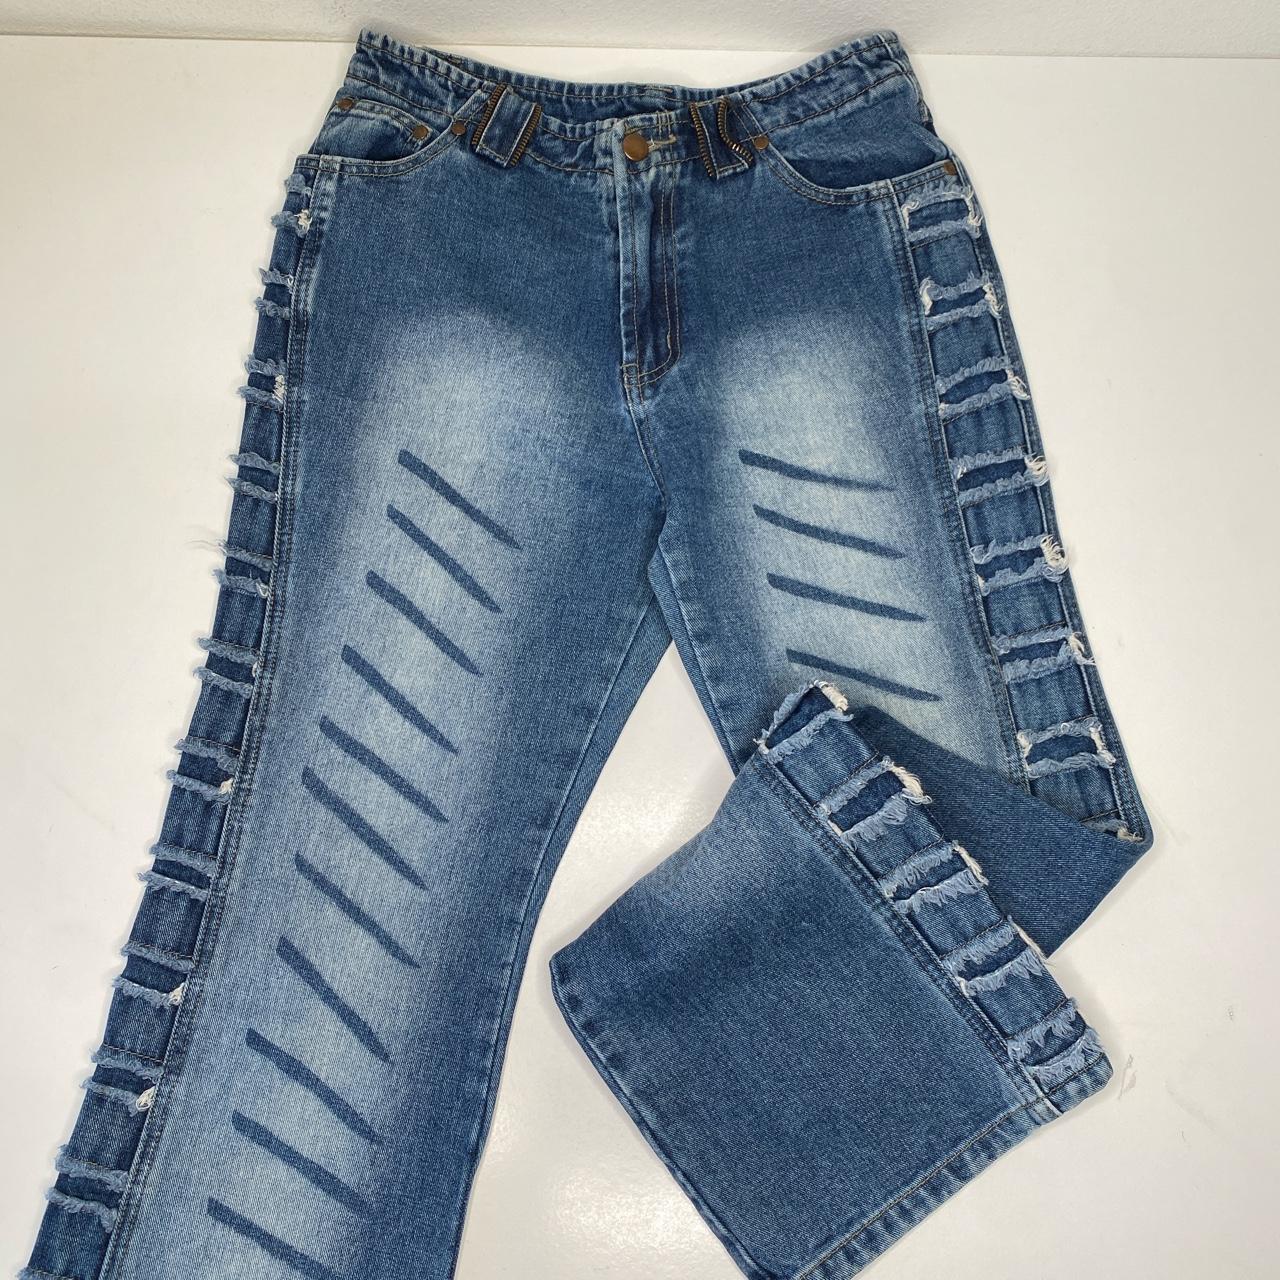 EARLY 2000s JEANS⭐️ Brand- zoey Beth size 5/6... - Depop